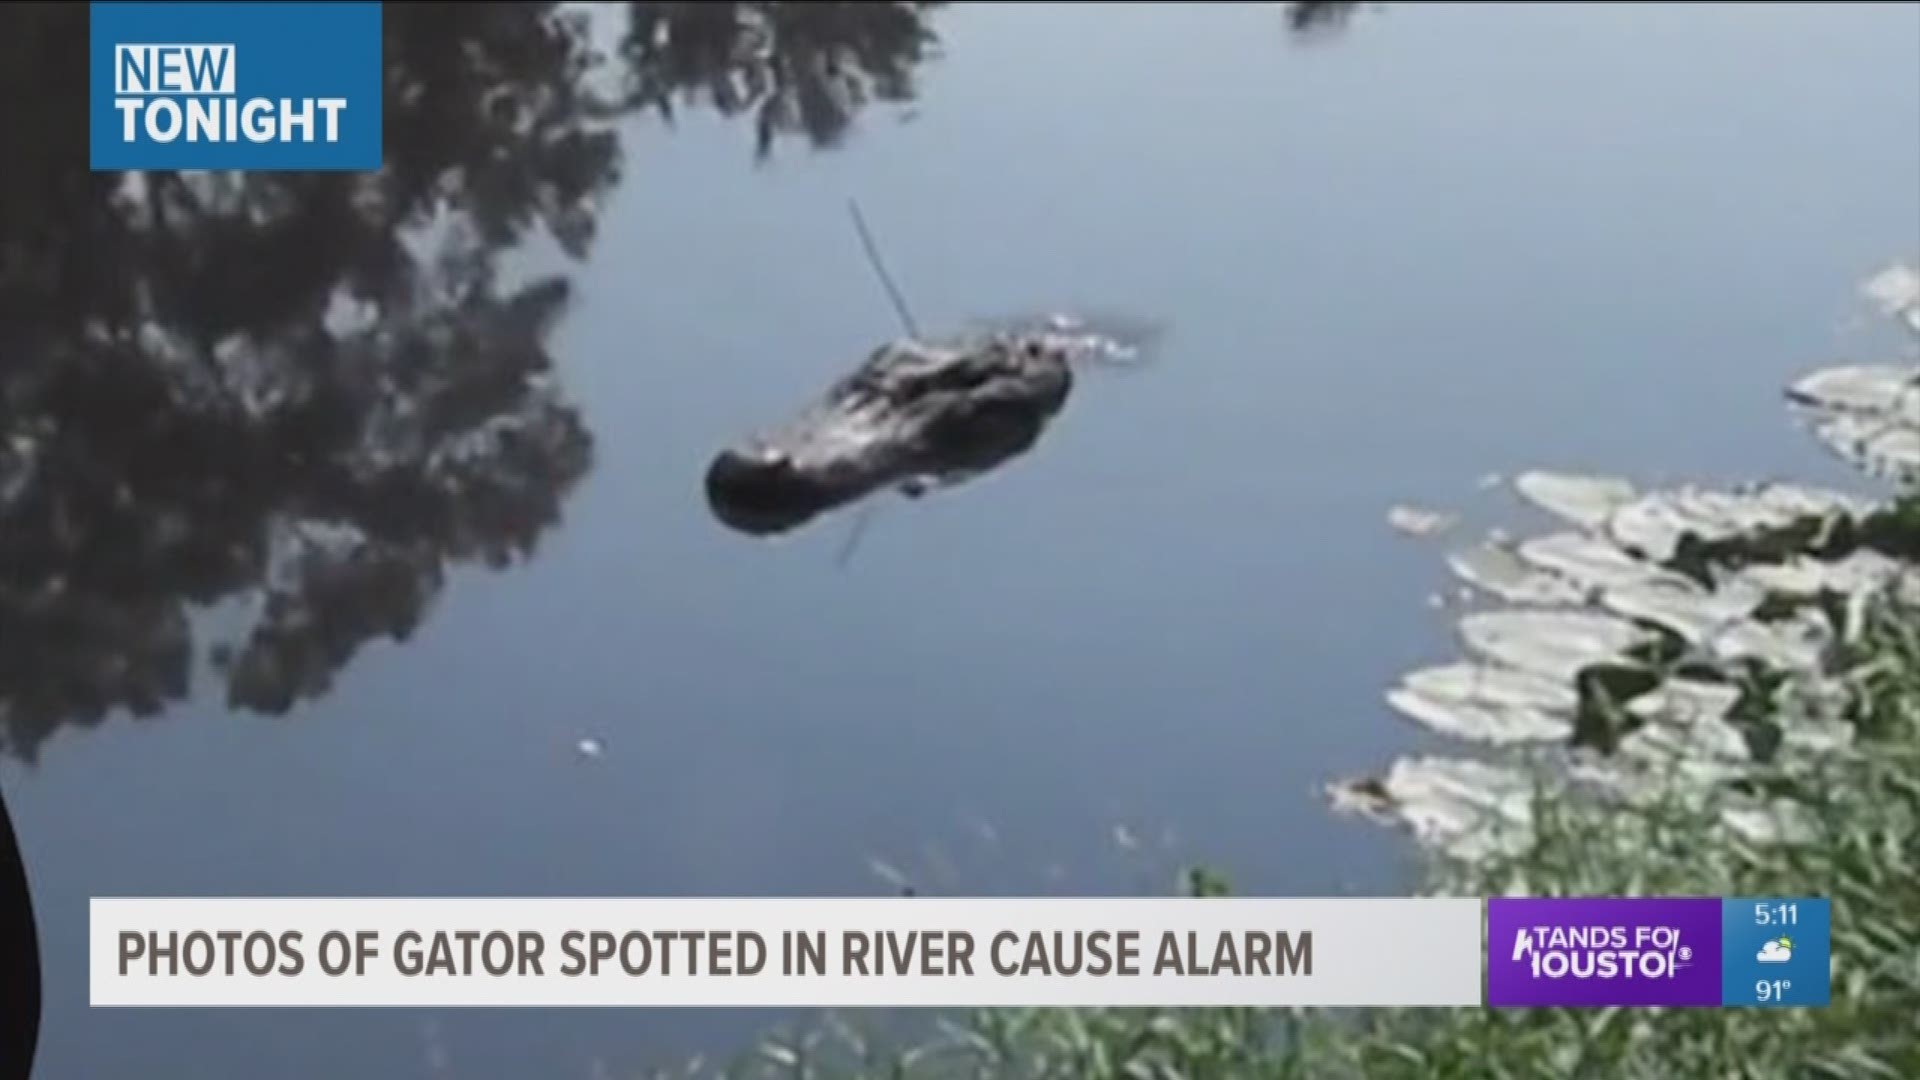 The New Braunfels Police Department took to Facebook Saturday to alleviate any concerns over social media posts that appeared to show an alligator floating in the Comal and Guadalupe Rivers.